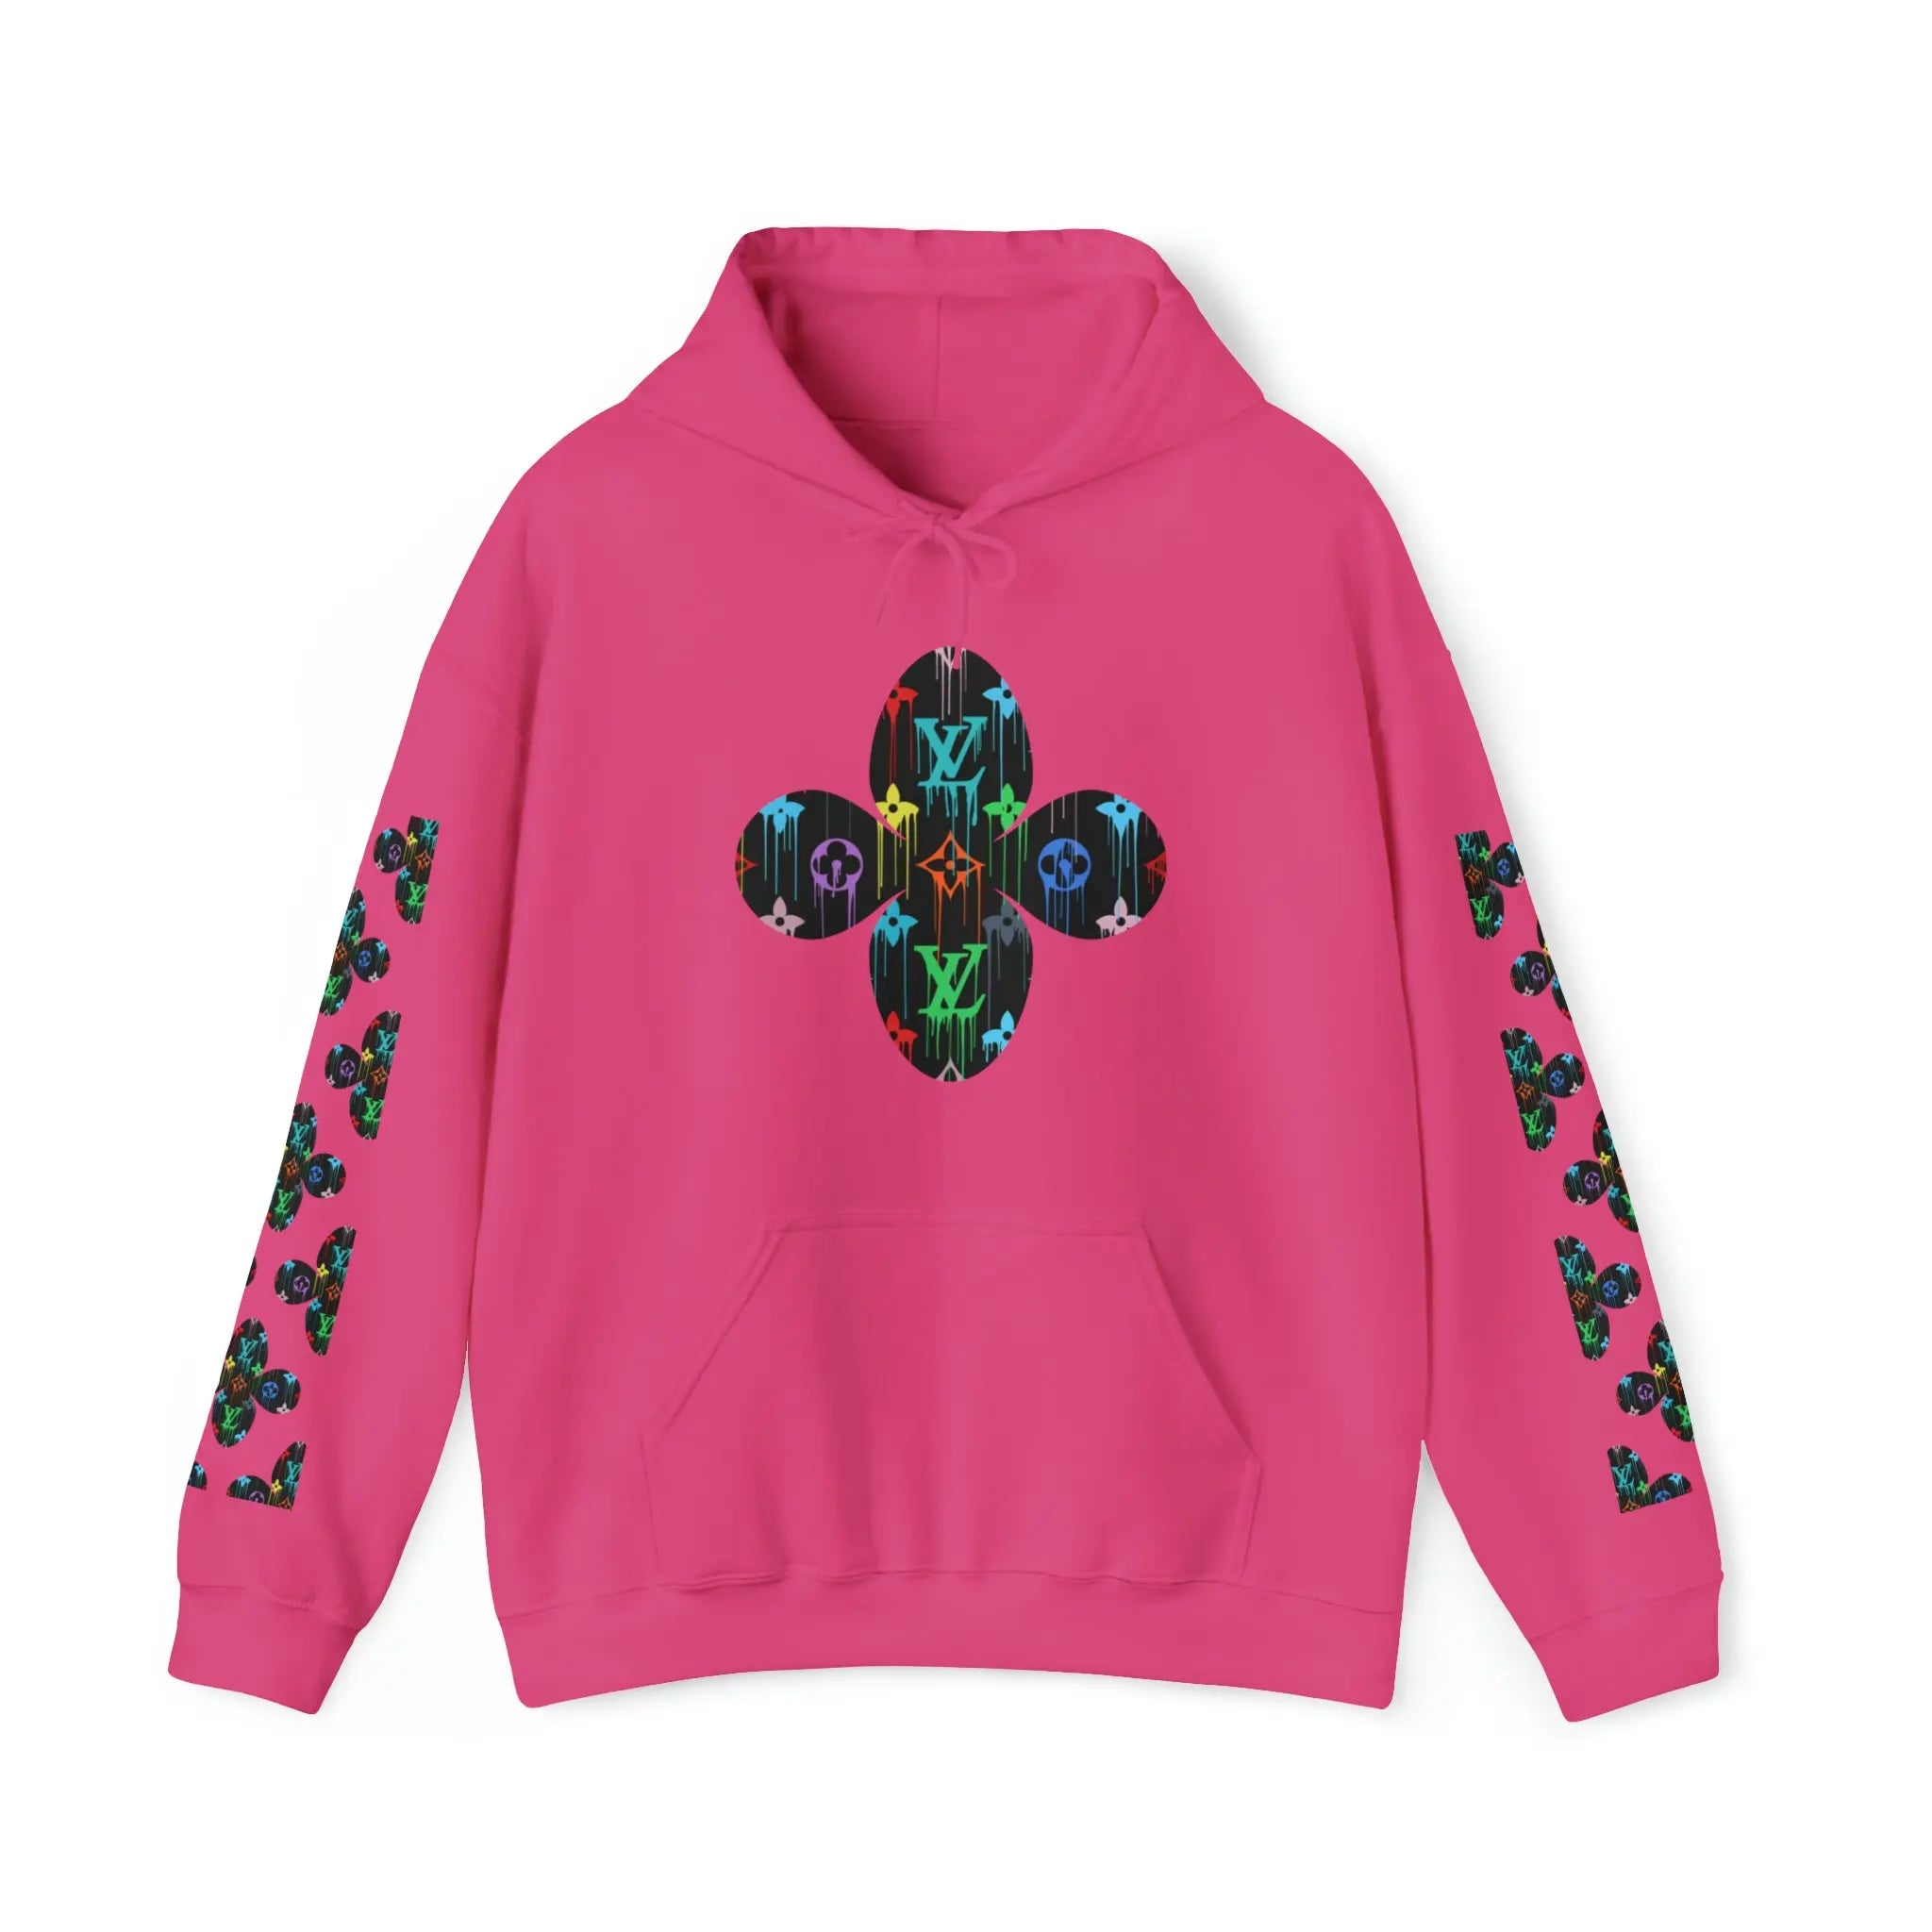  Multi-Colour Dripping Icons Flower with Sleeve Print Unisex Heavy Blend Hooded Sweatshirt HoodieHeliconia5XL